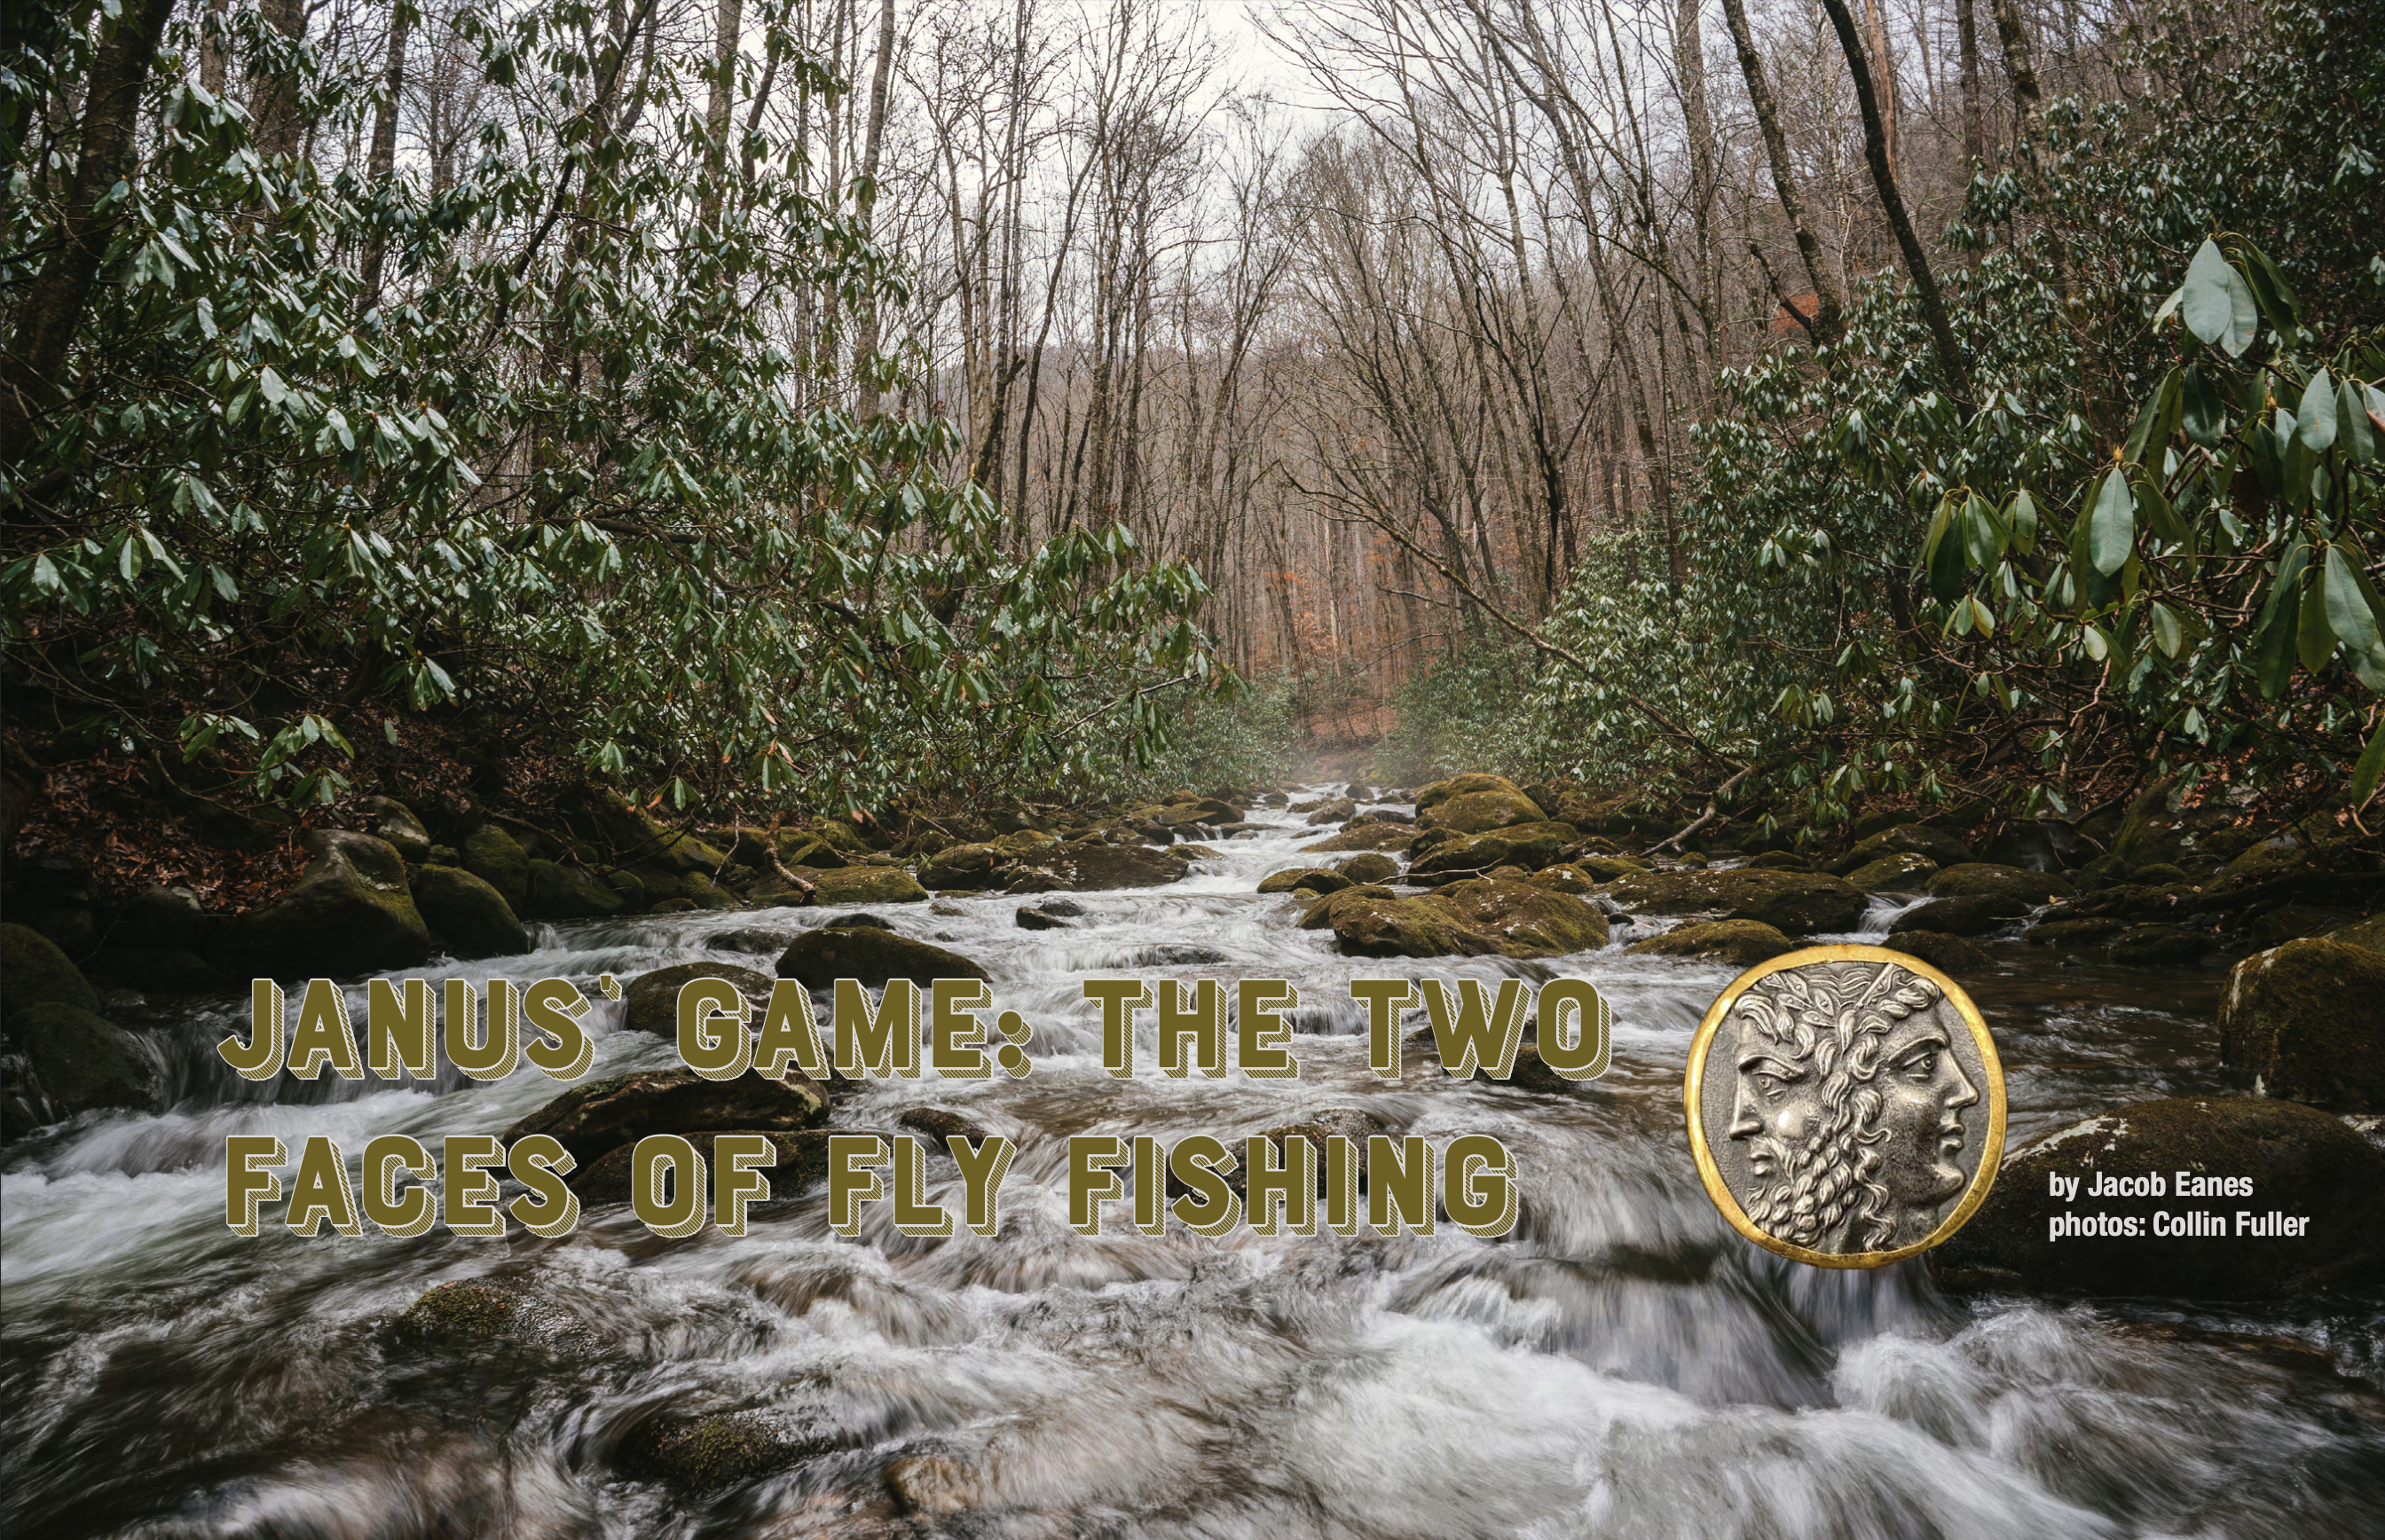 Janus’ Game: the two faces of fly fishing